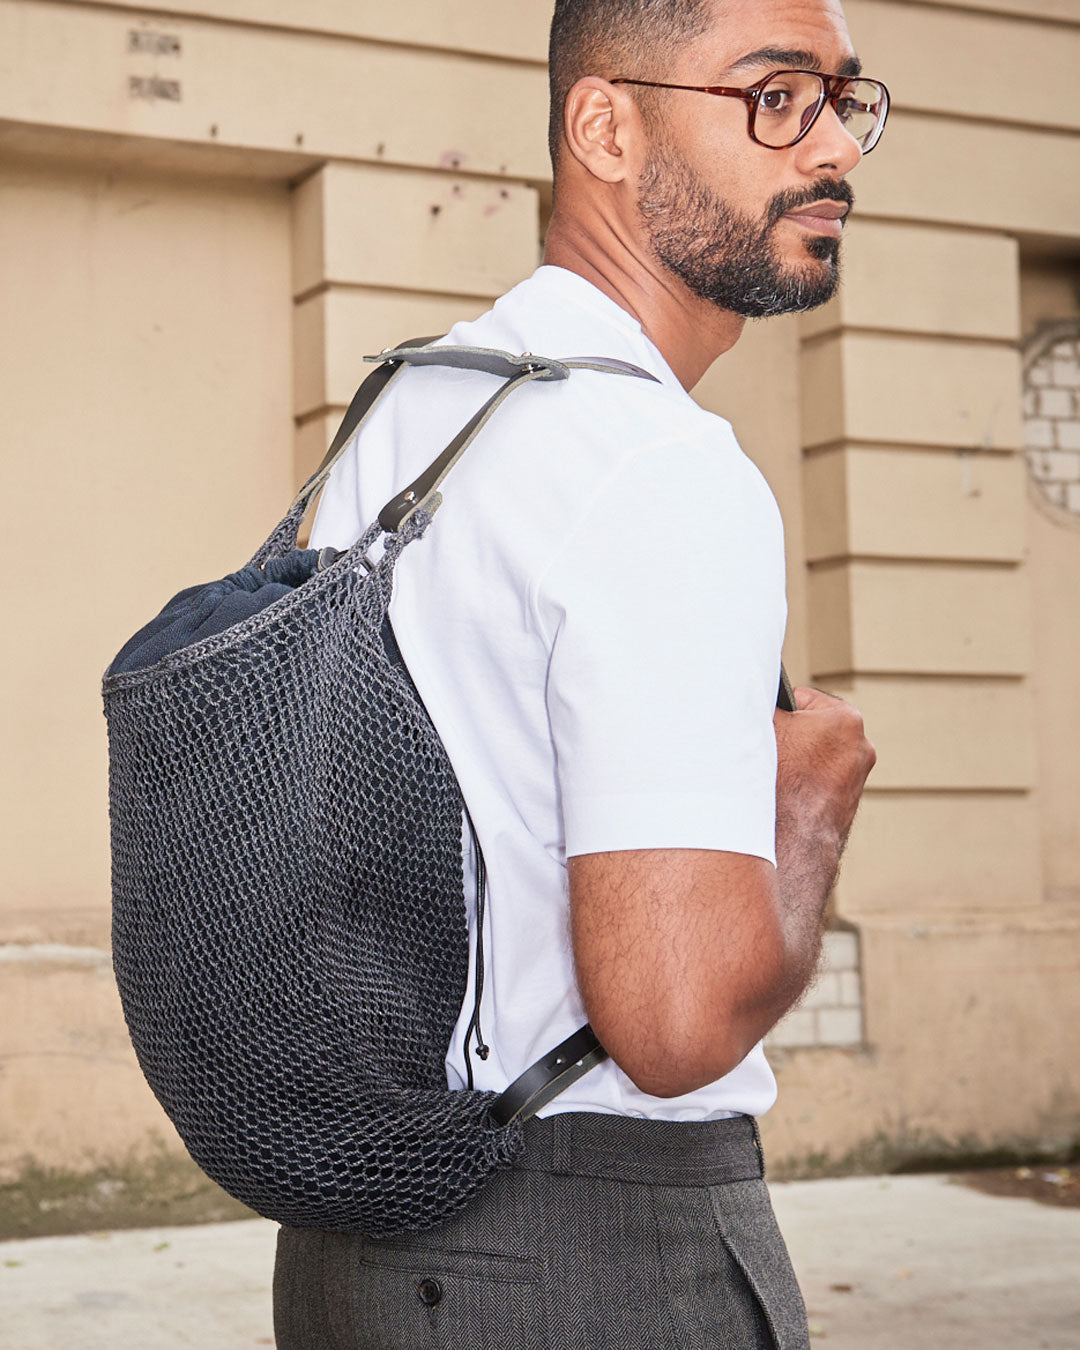 The Rucksack (two-in-one)